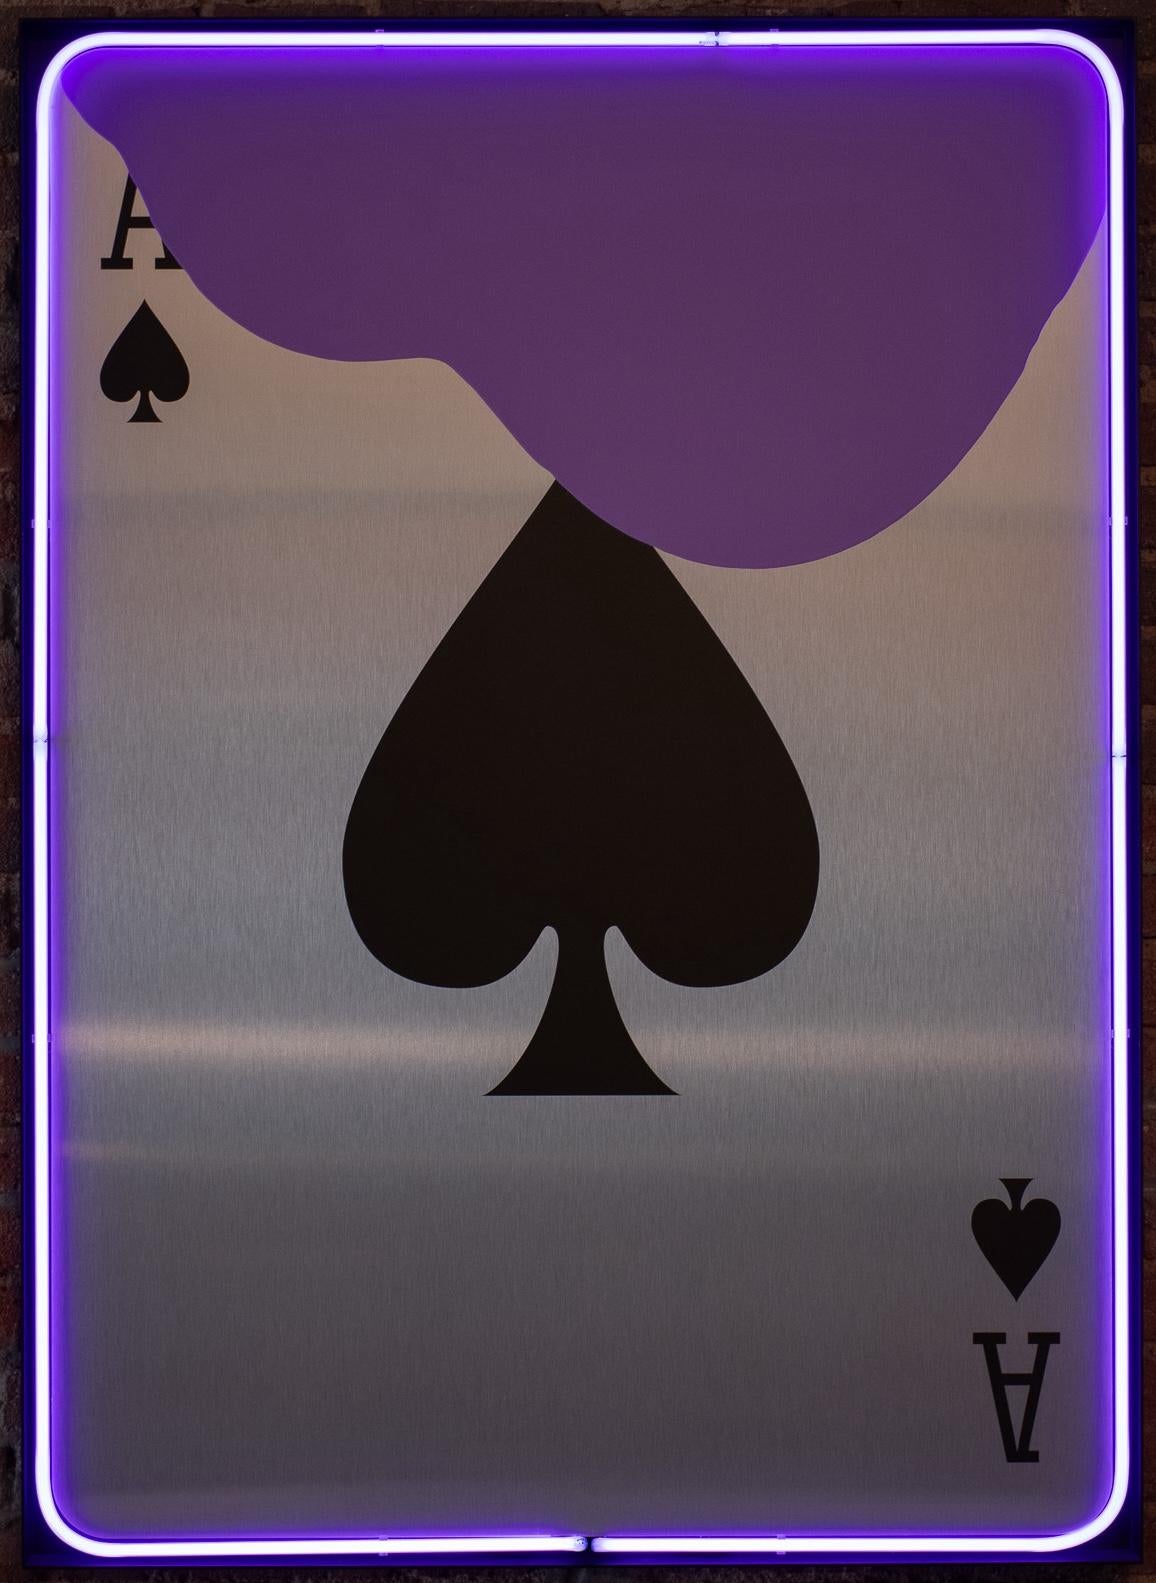 "All In: Ace of Spades (Royal Purple)" 54" x 39" inch by Oleg Char